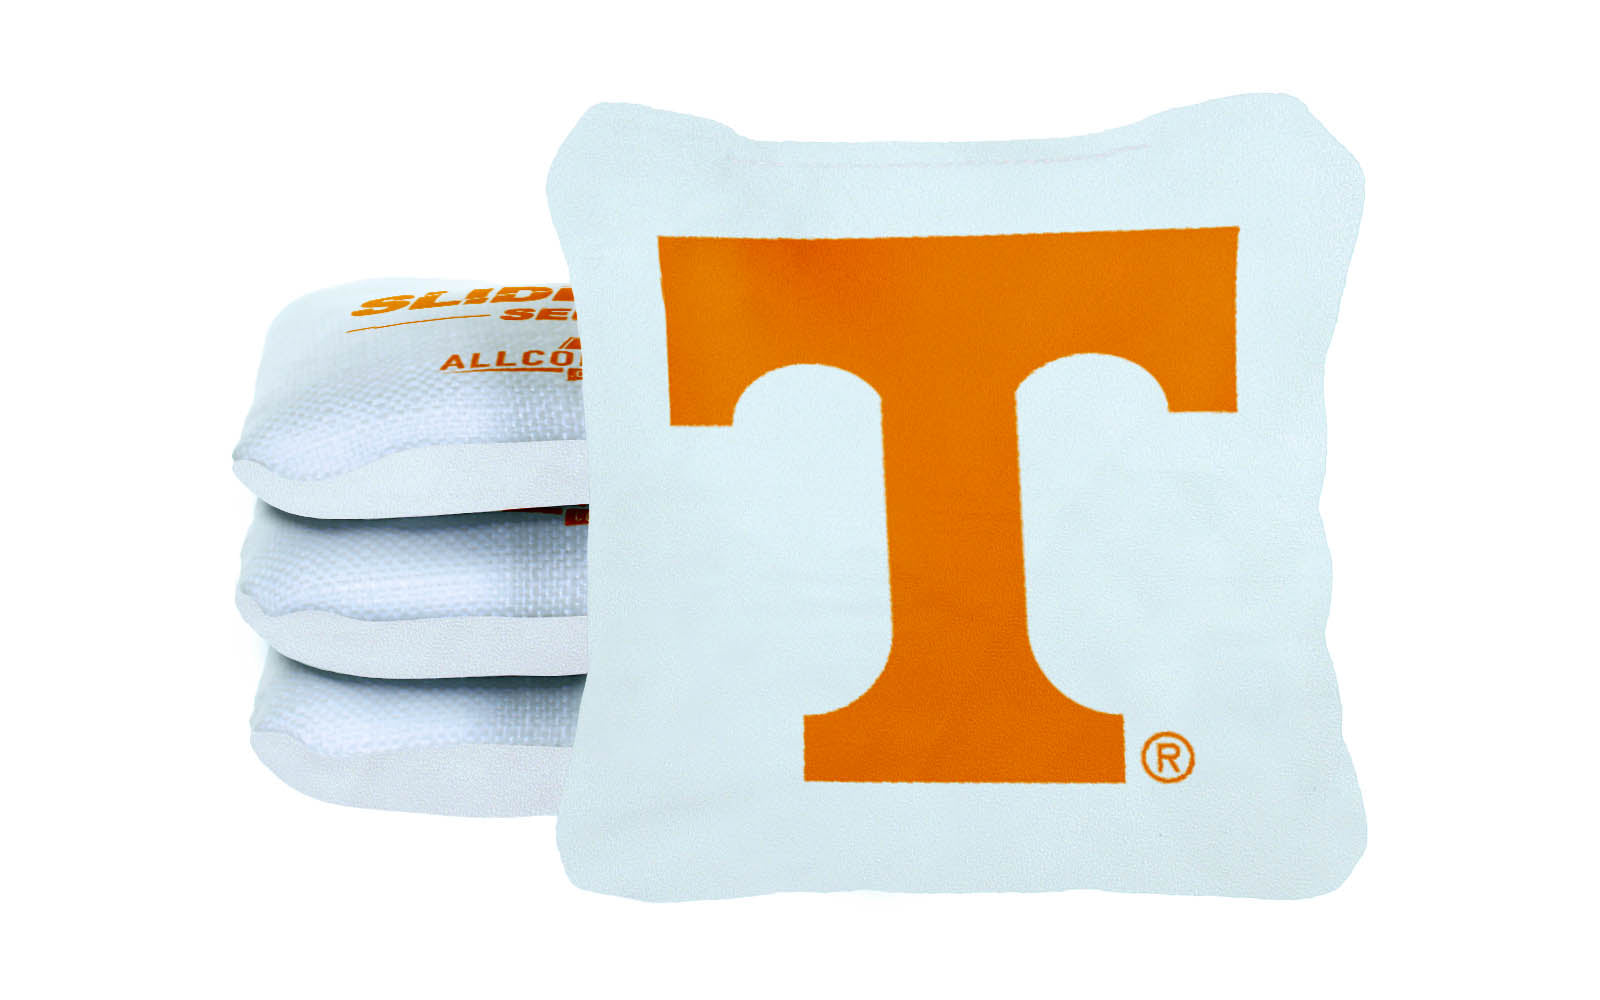 Officially Licensed Collegiate Cornhole Bags - Slide Rite - Set of 4 - University of Tennessee